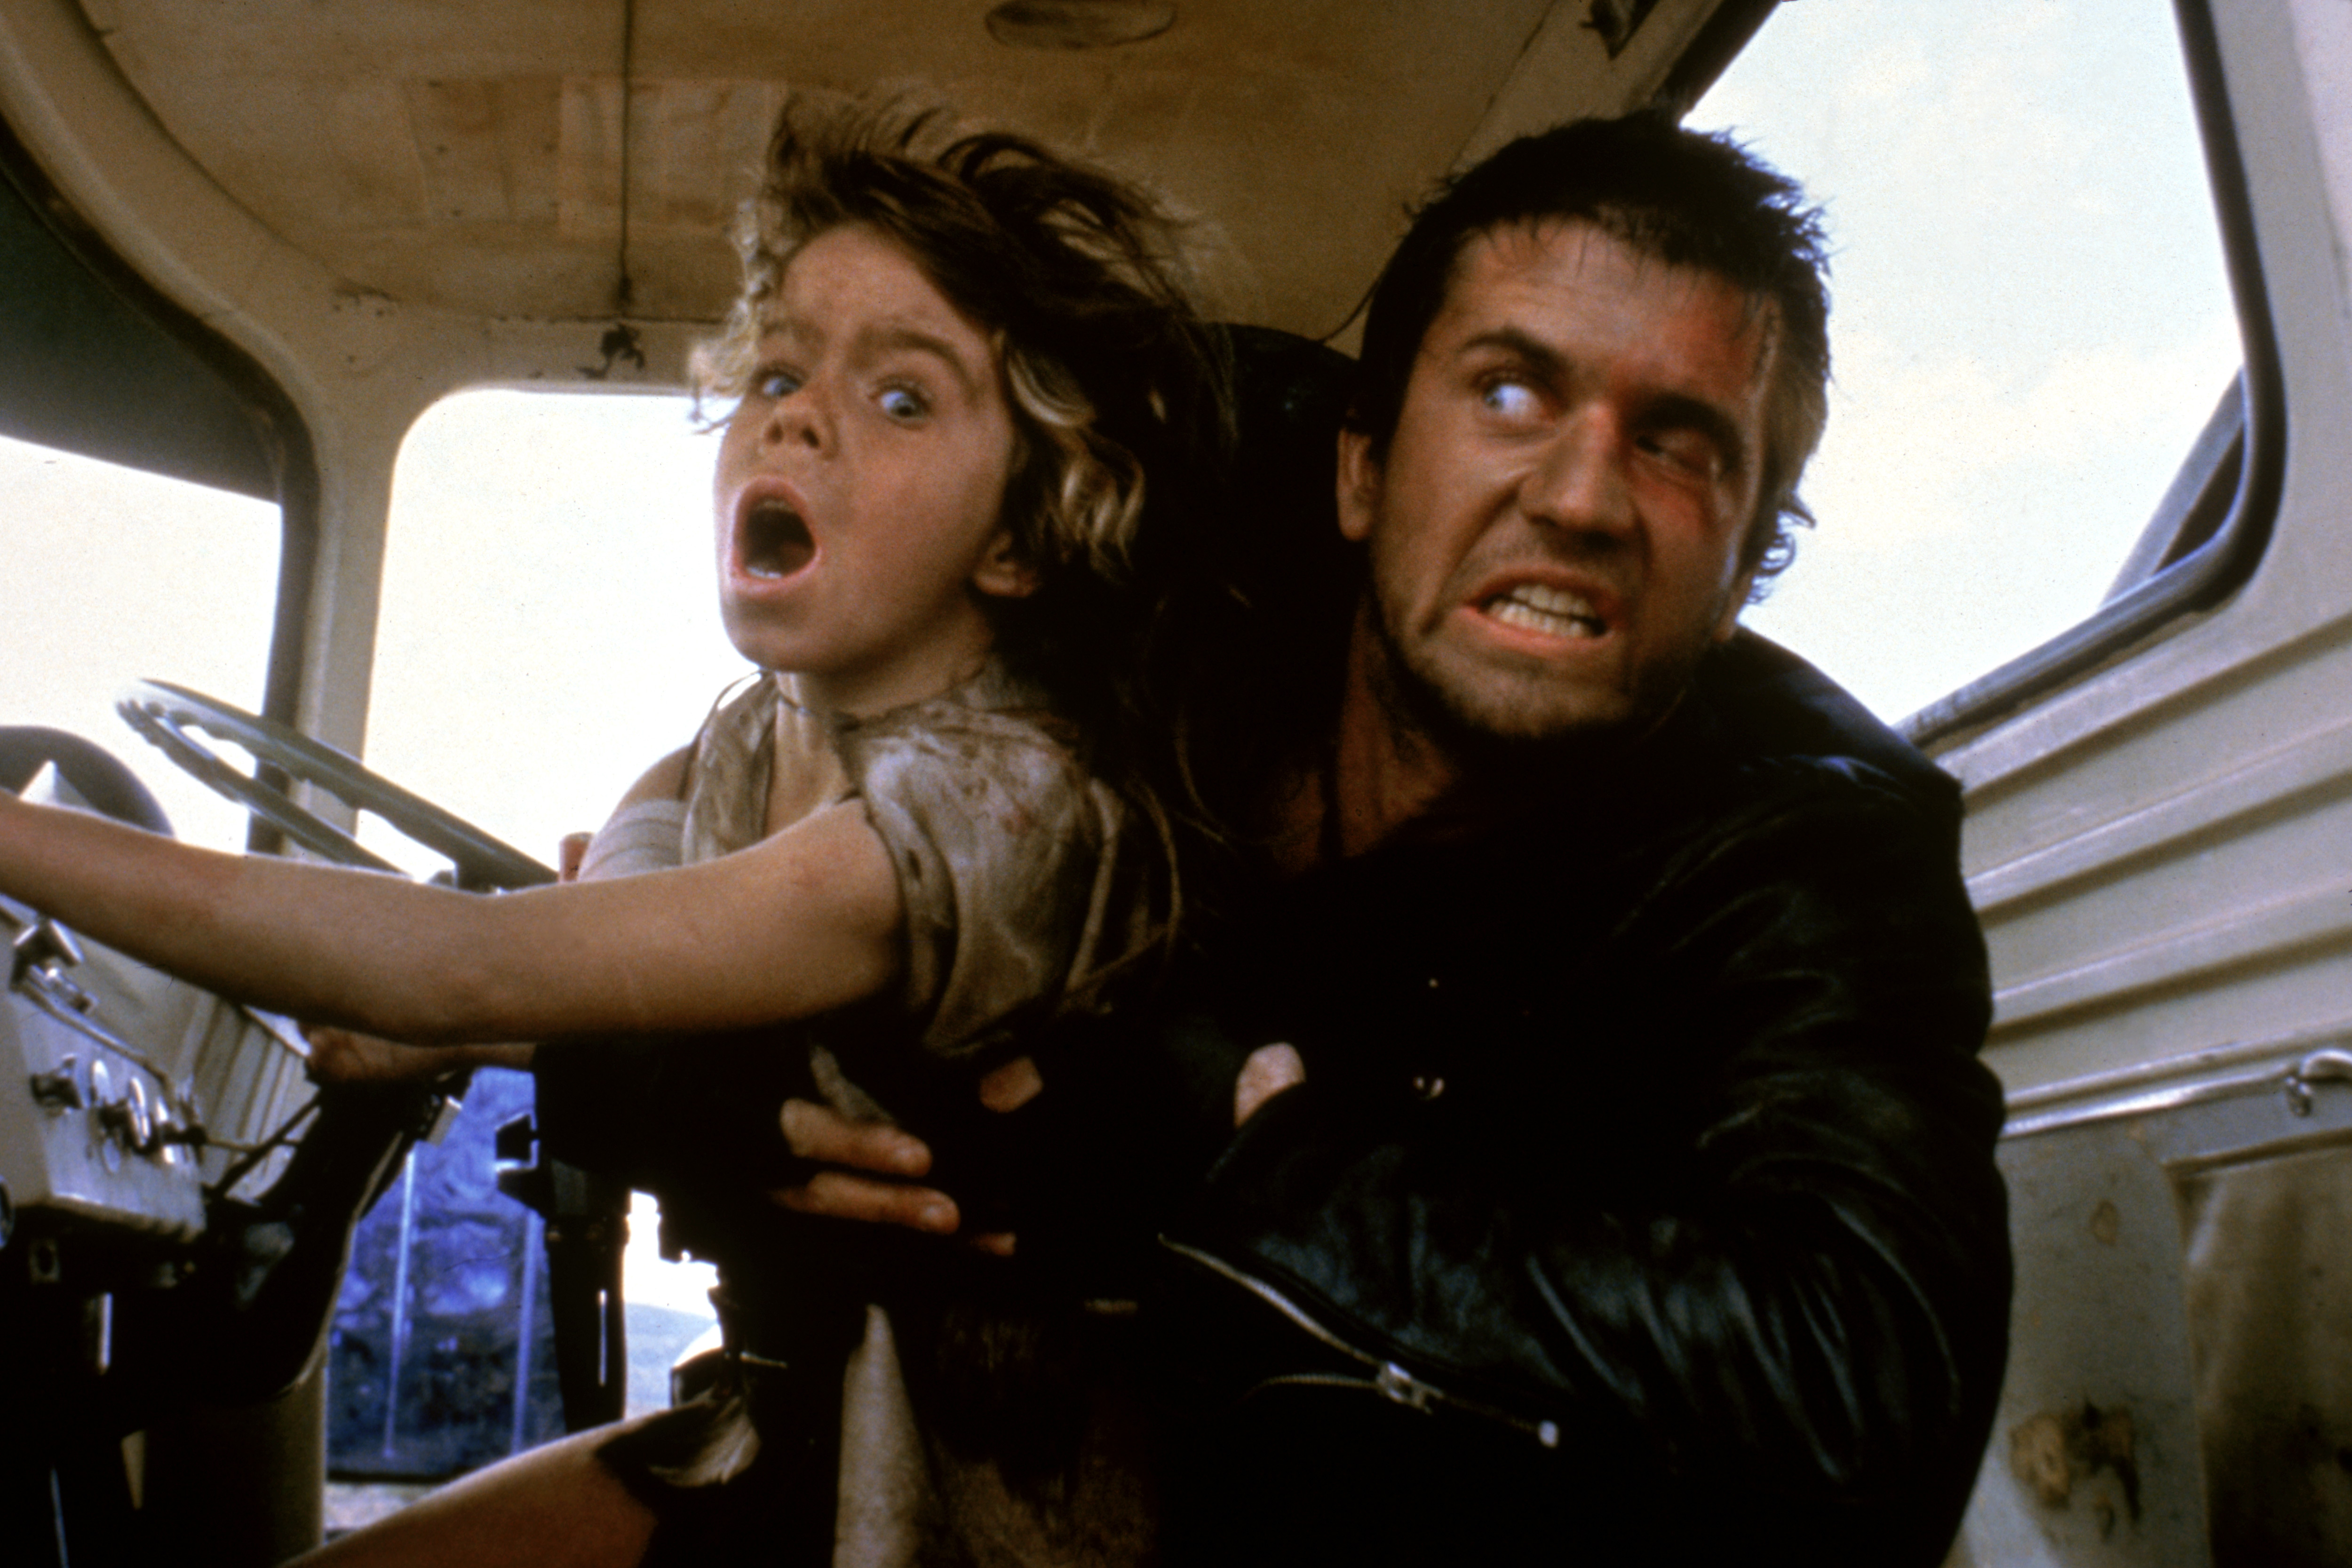 mad max 2 the road warrior